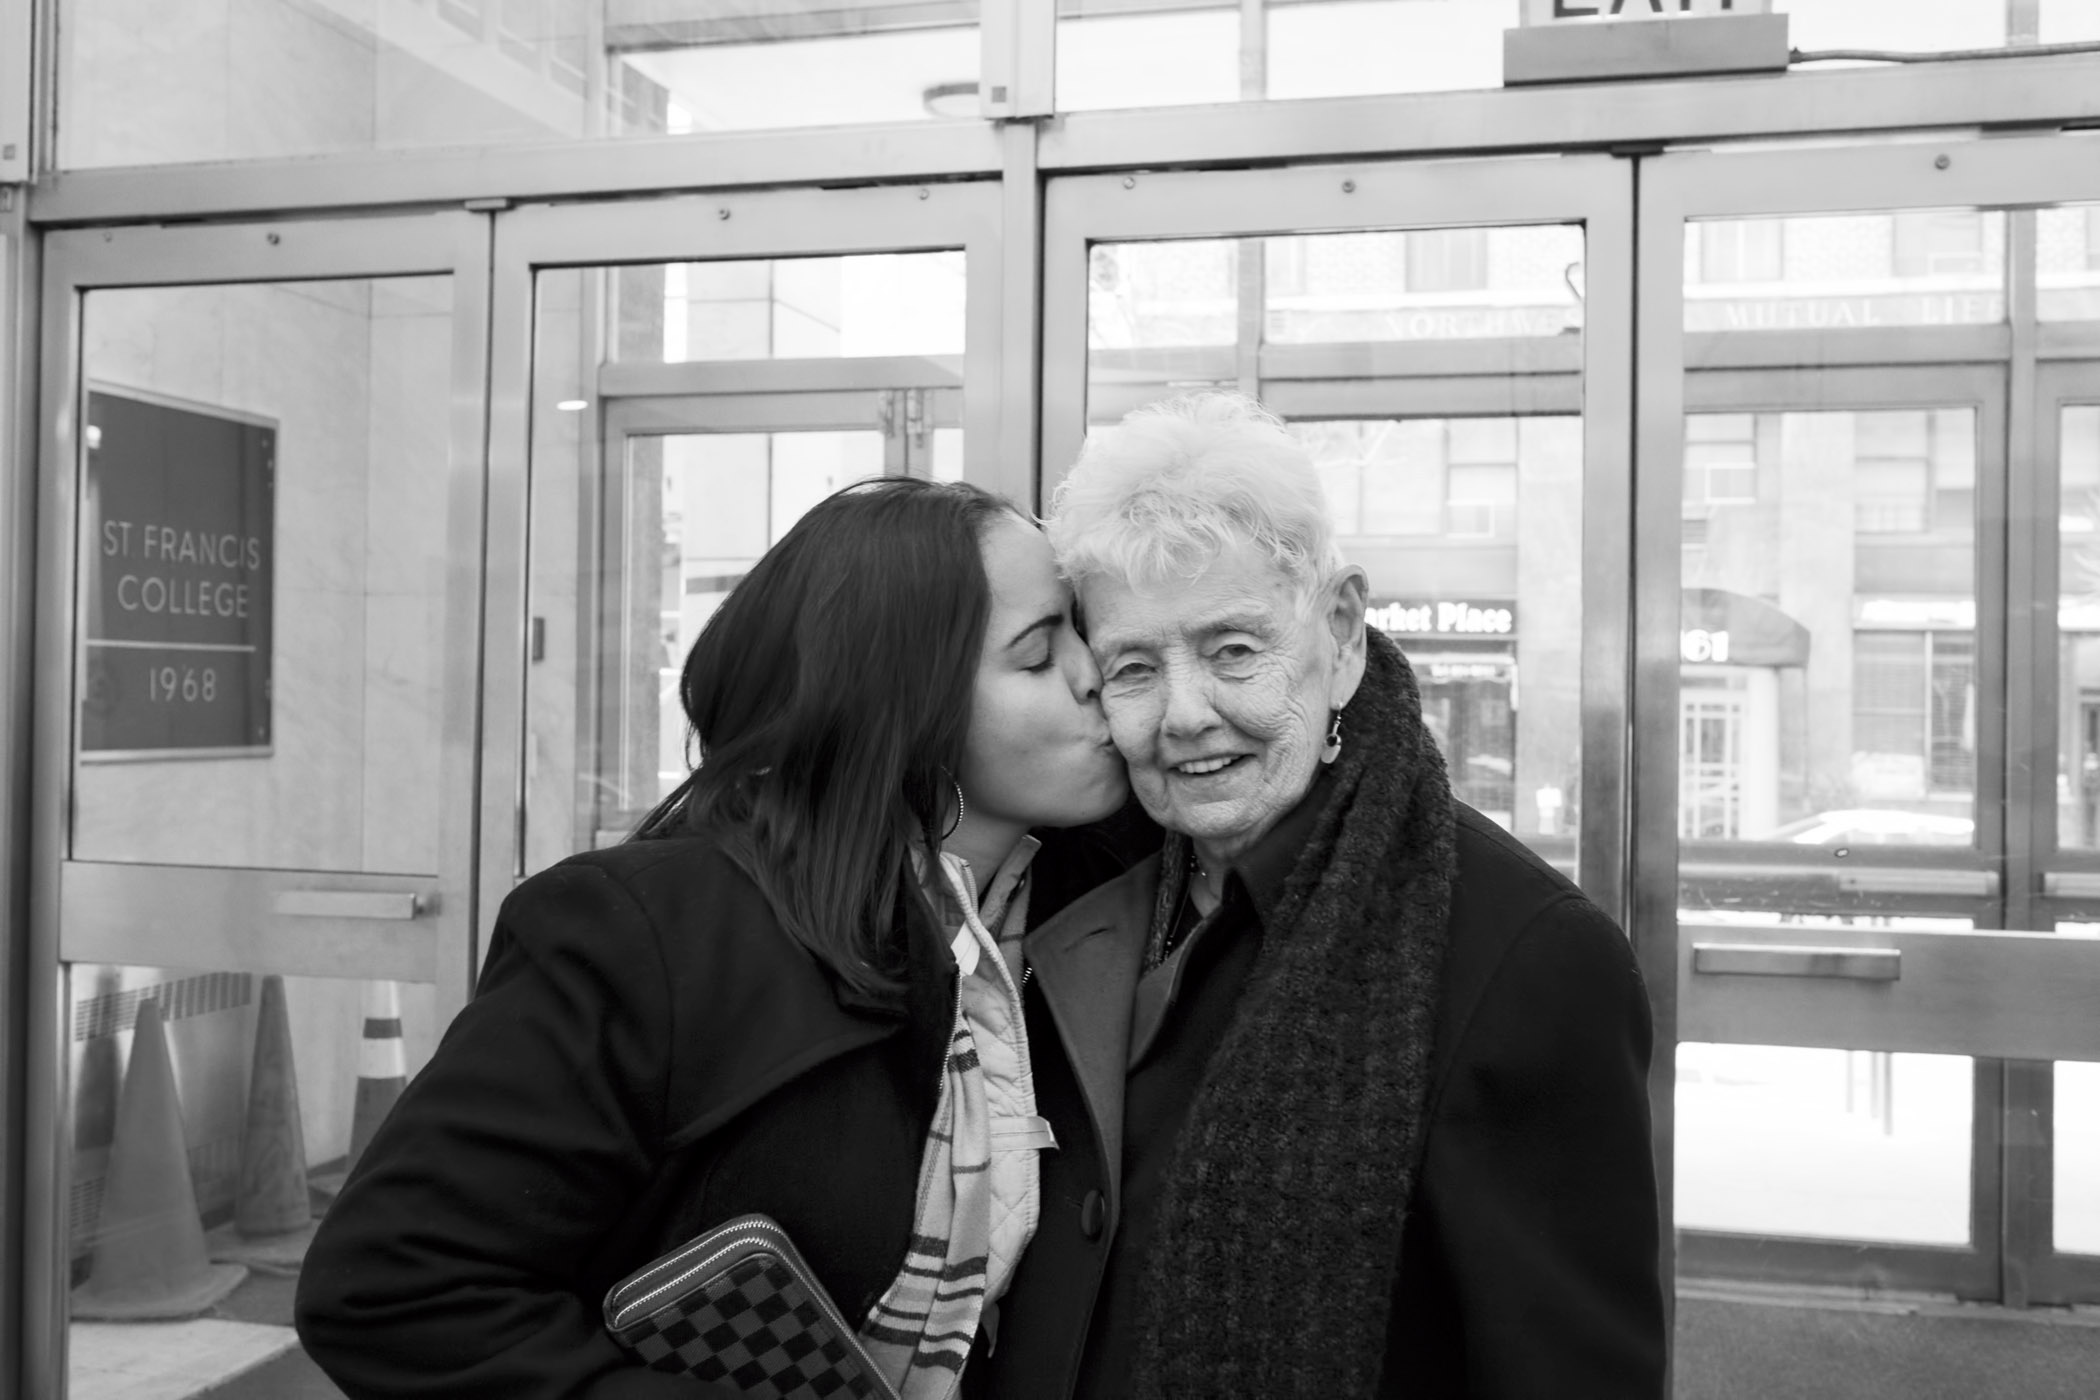 Evelyn with Sister Elaine Roulet, a nun who worked in Bedford Hills Correctional Facility. Brooklyn, NY (2015)